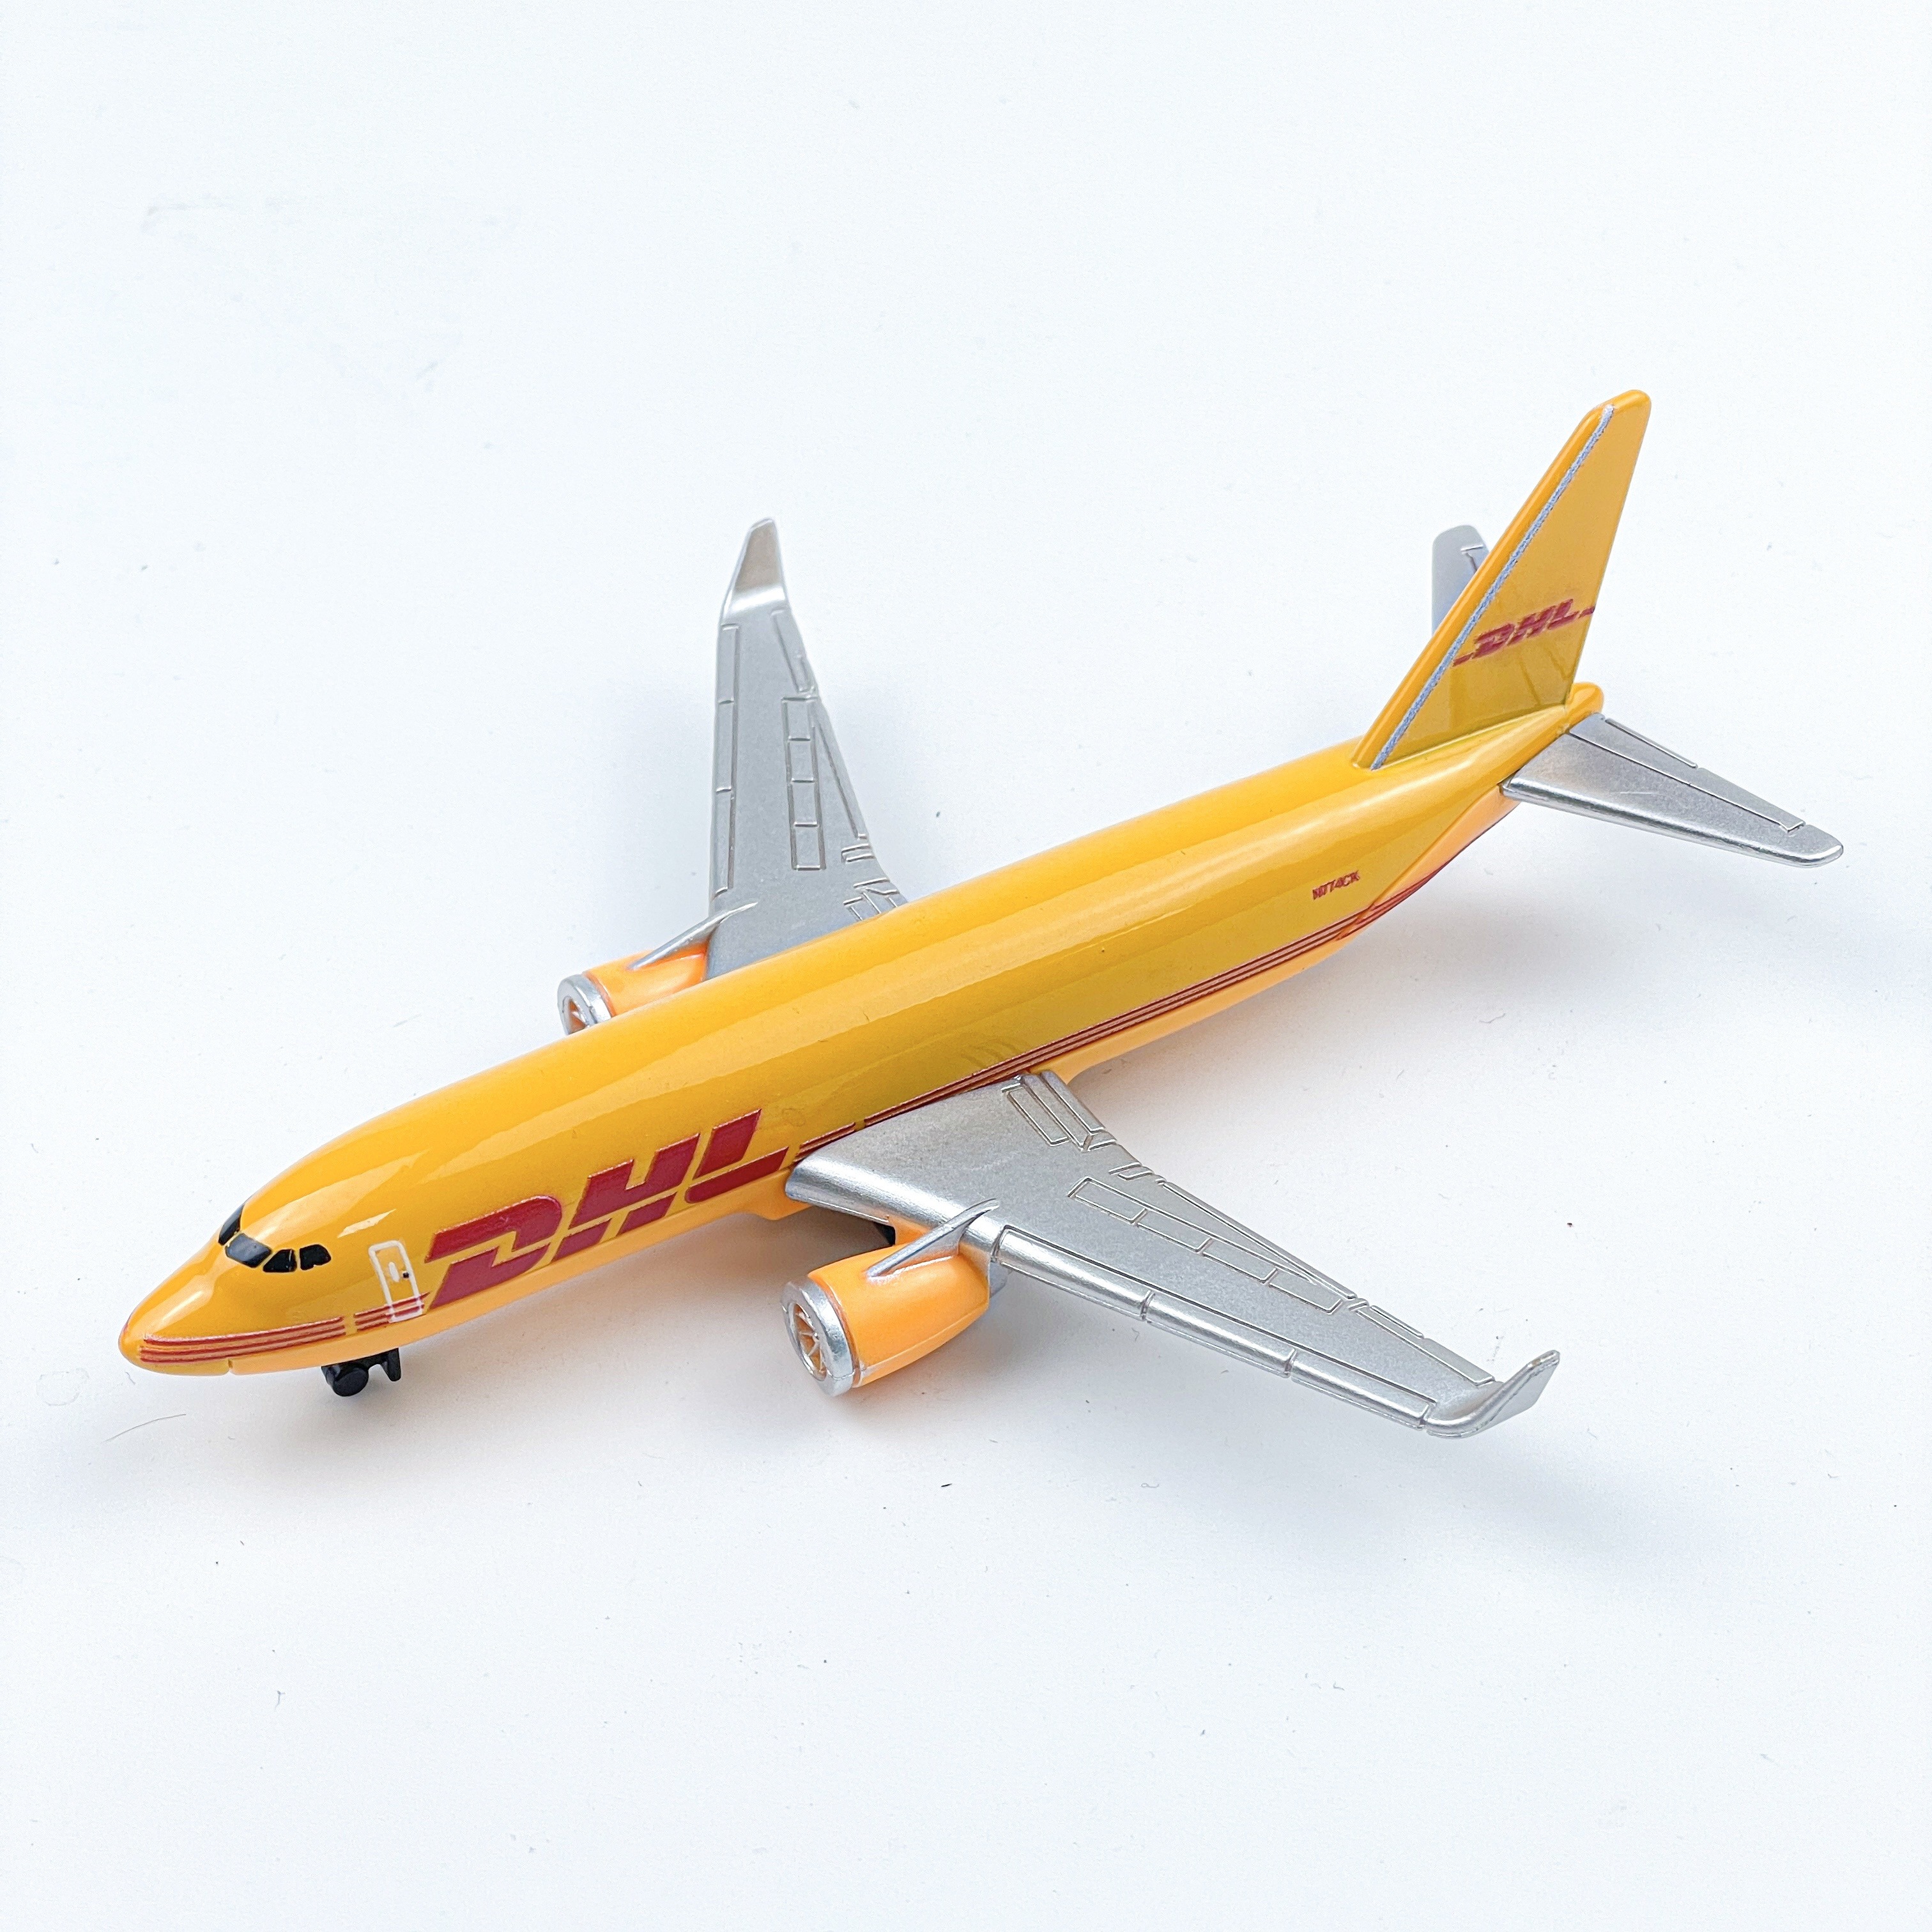 

Dhl Push-action Die-cast Metal Airplane Model Toy, Collectible And Gift Item For Christmas And Birthdays, Home Decor Display - For Children Ages 3-12 Years